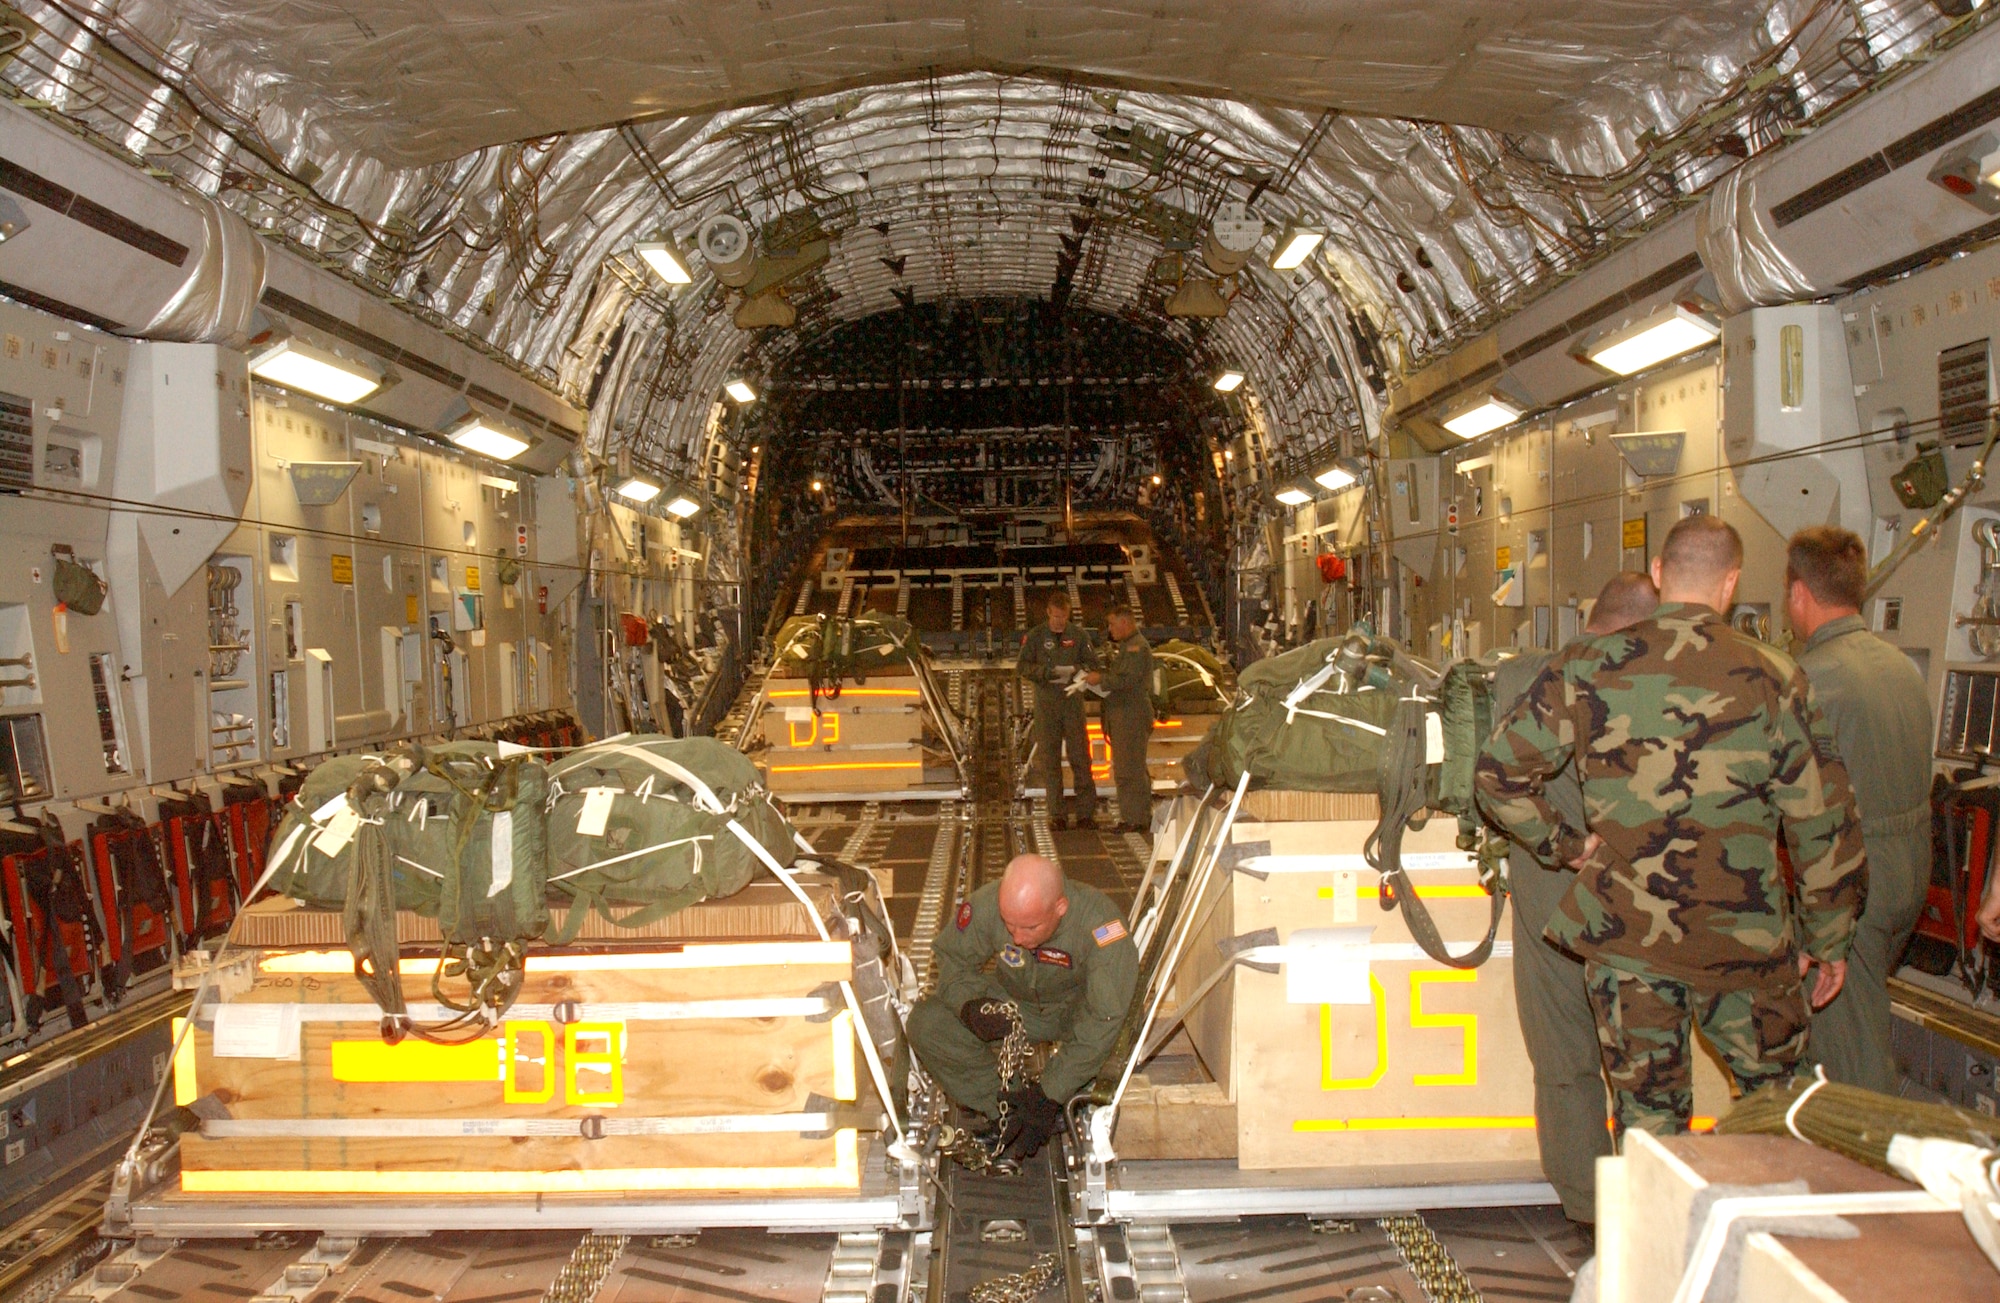 ALTUS AIR FORCE BASE, Okla. -- Loadmasters chain down cargo and make final checks on a C-17 Globemaster III on July 5 in preparation for a dual-row airdrop.  (U.S. Air Force photo by Airman 1st Class Aldric Borders)